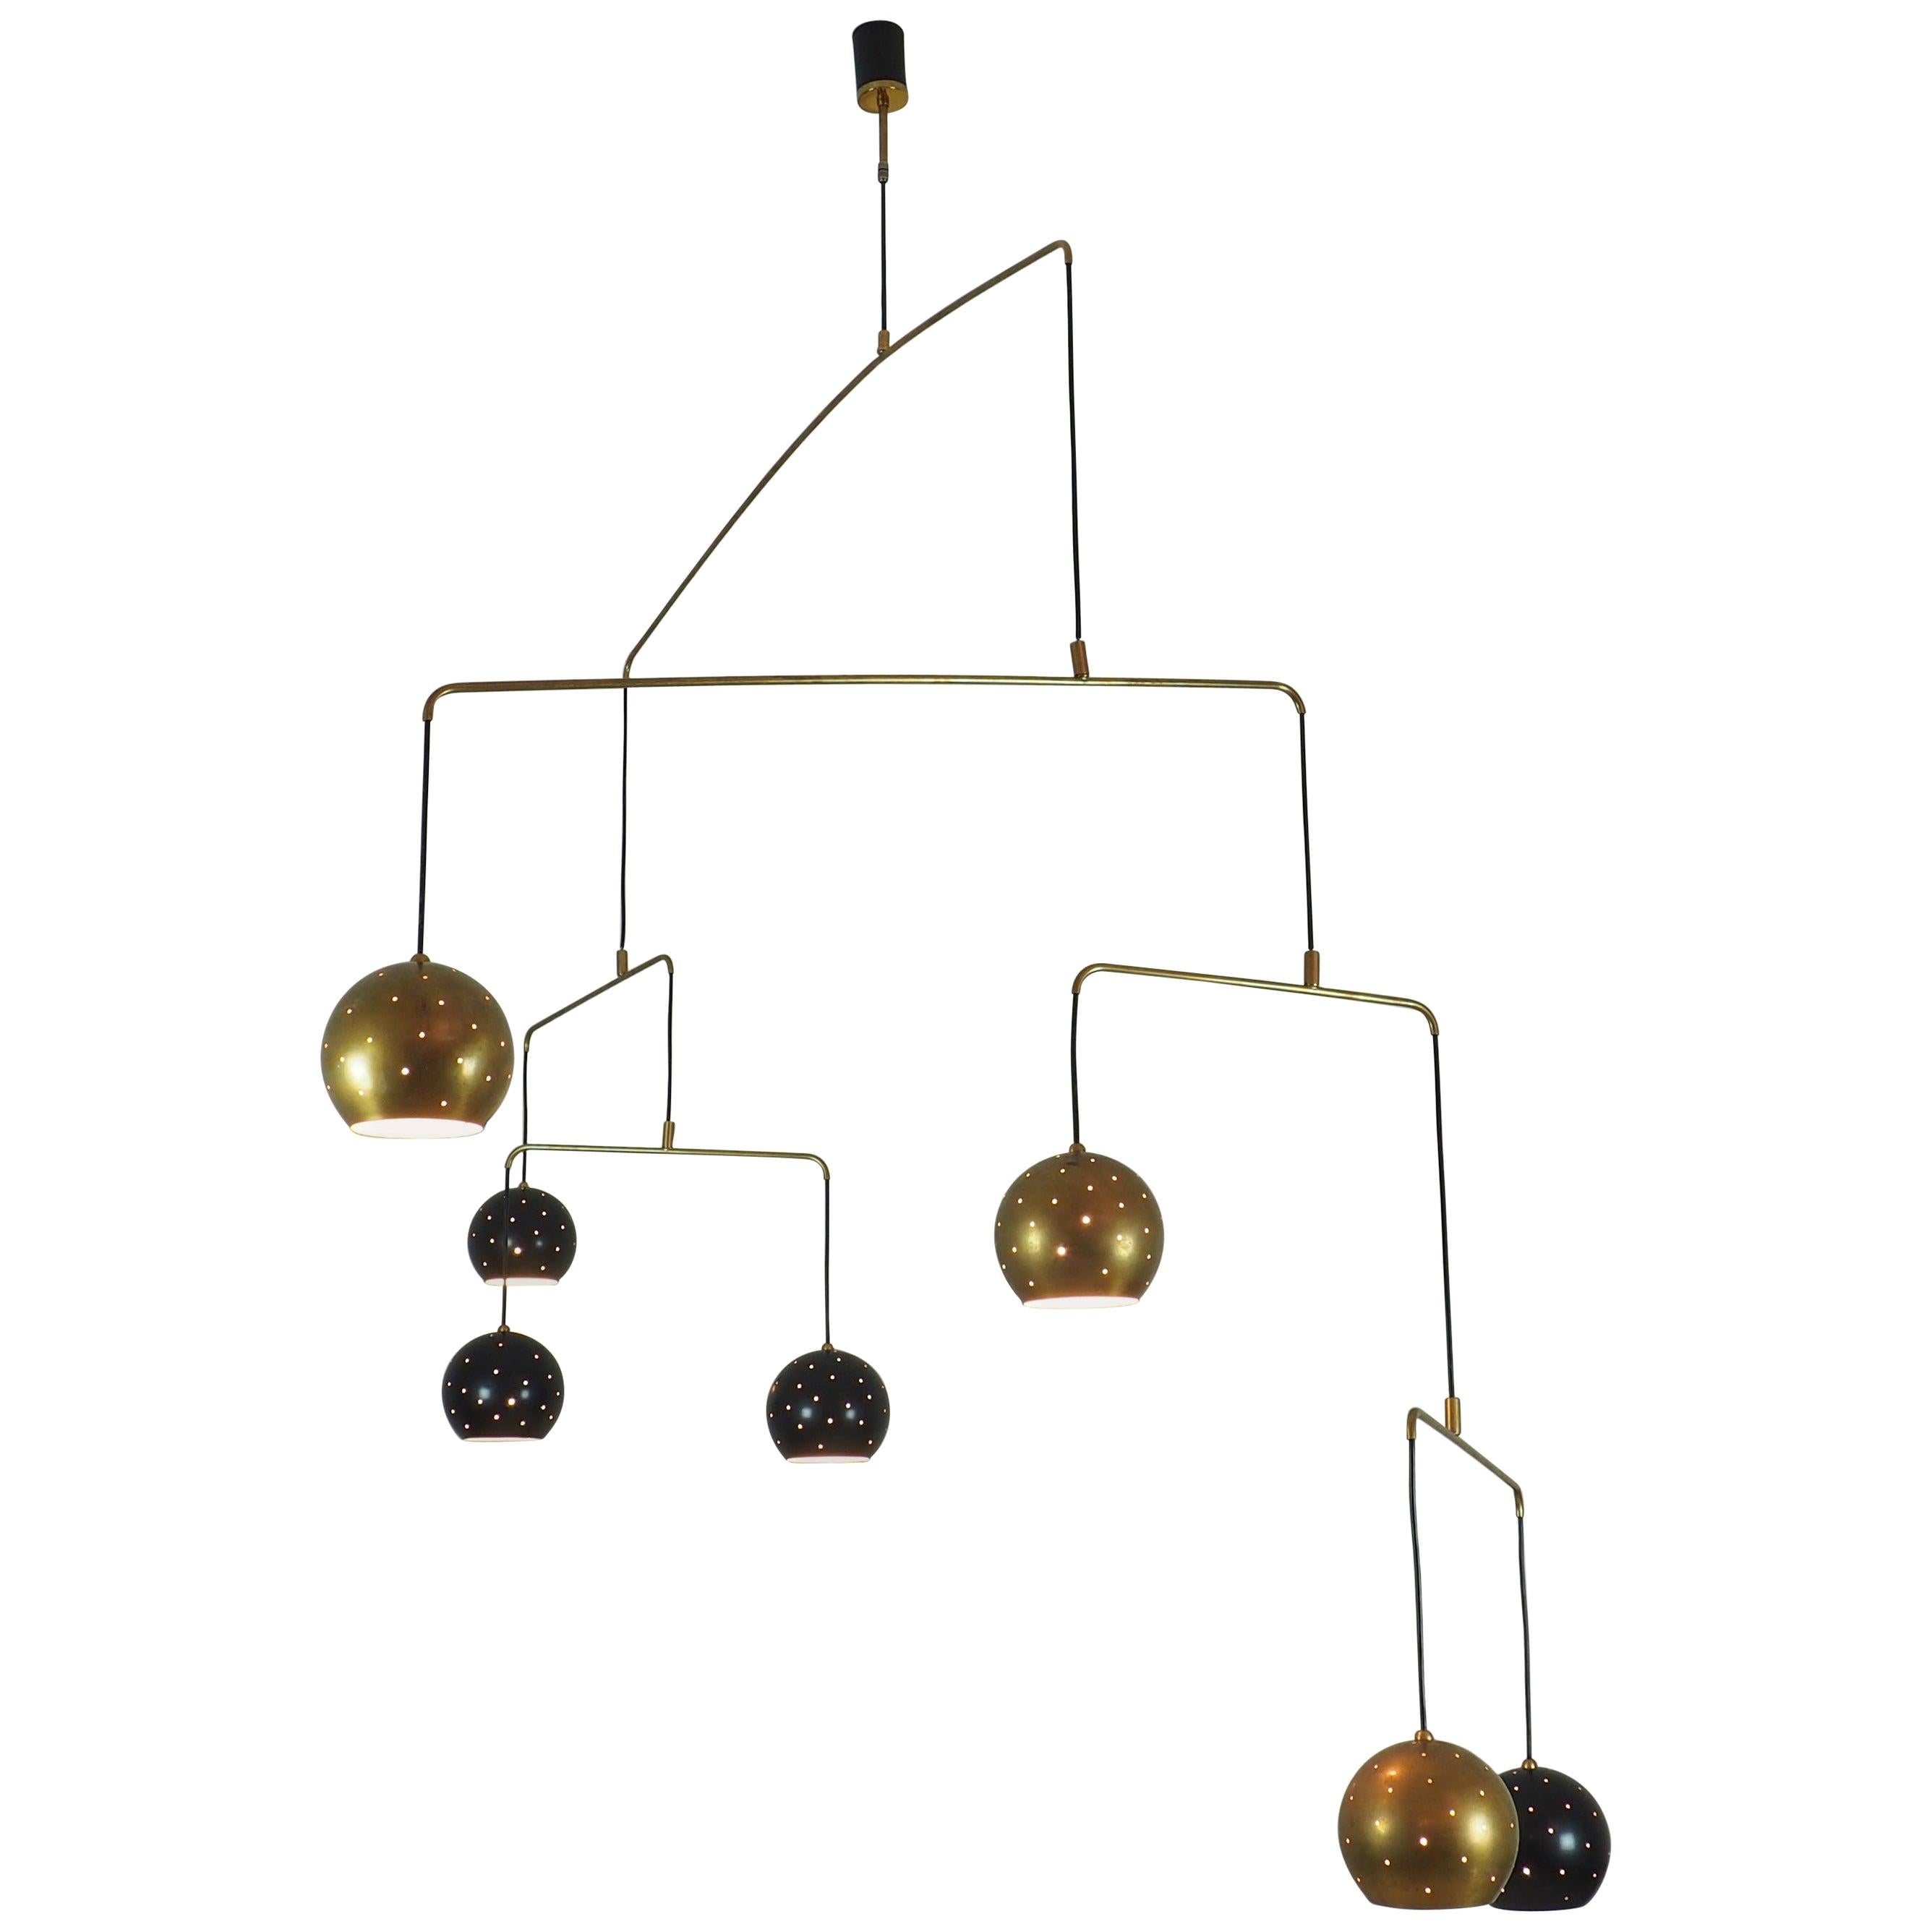 Brass and Black Spheres Large Mobile Chandelier "Magico e Meditativo", Italy